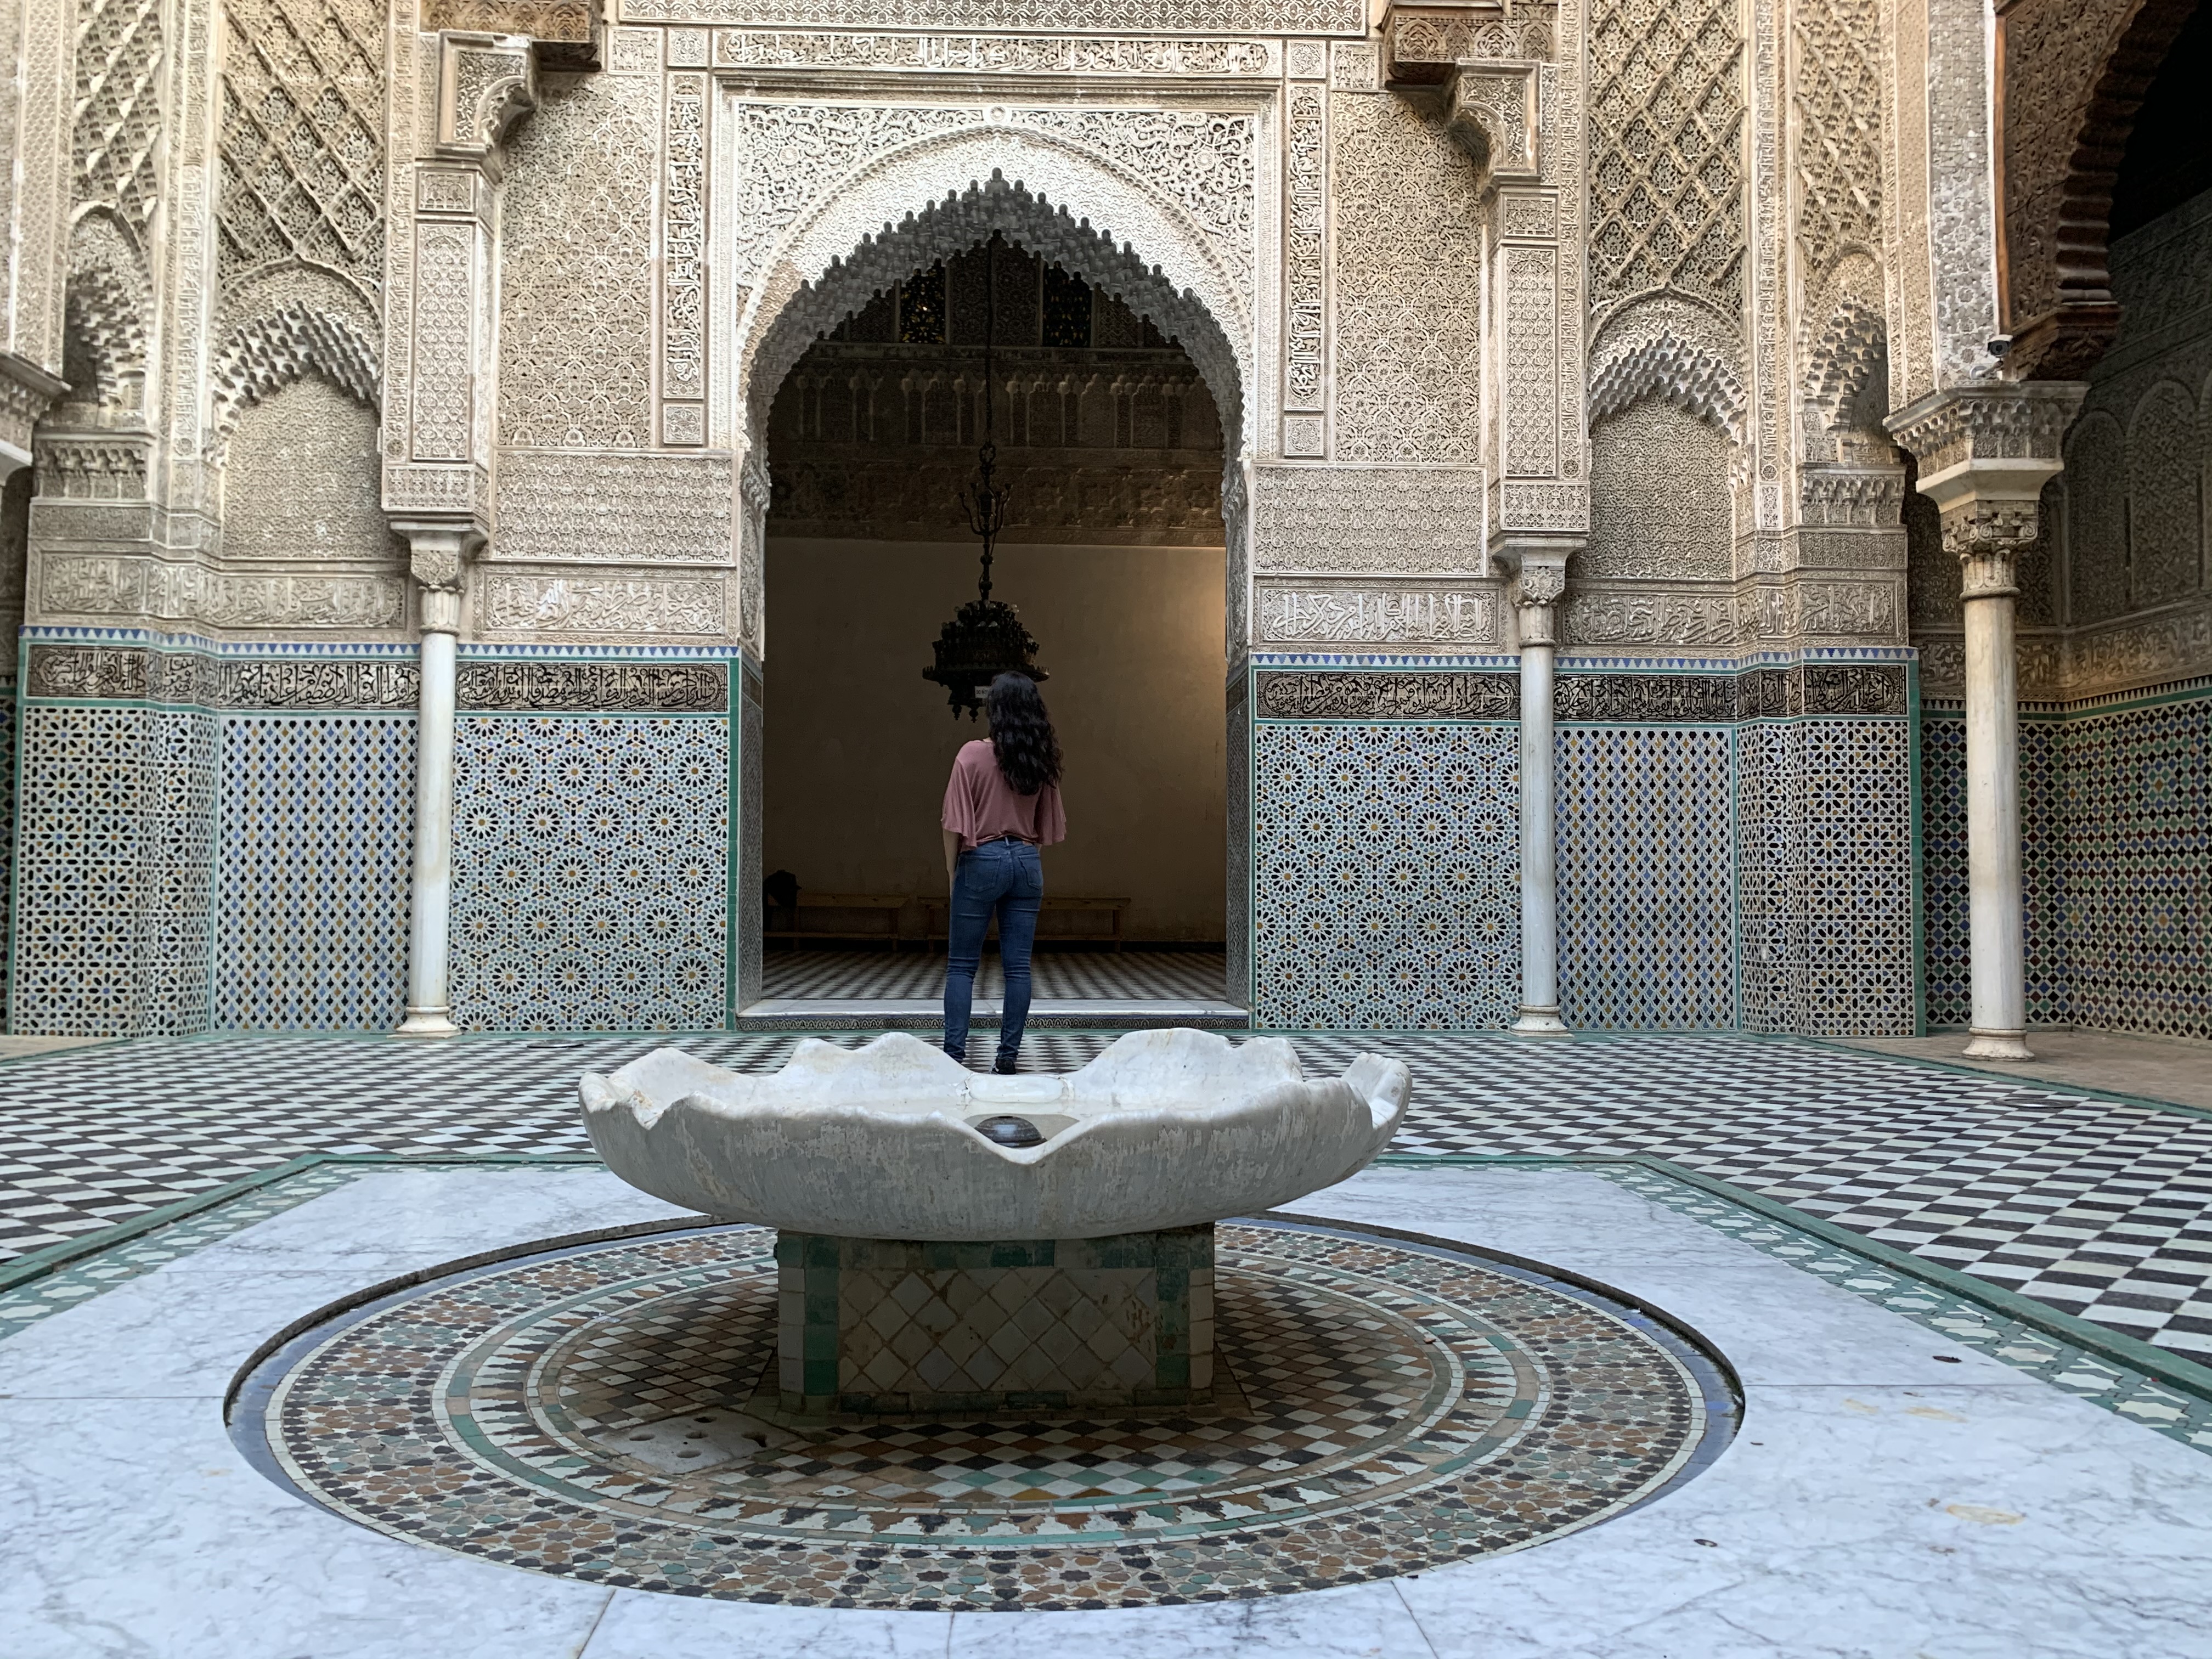 Student in the Al-Attarine Madrasa with a fountain in front.